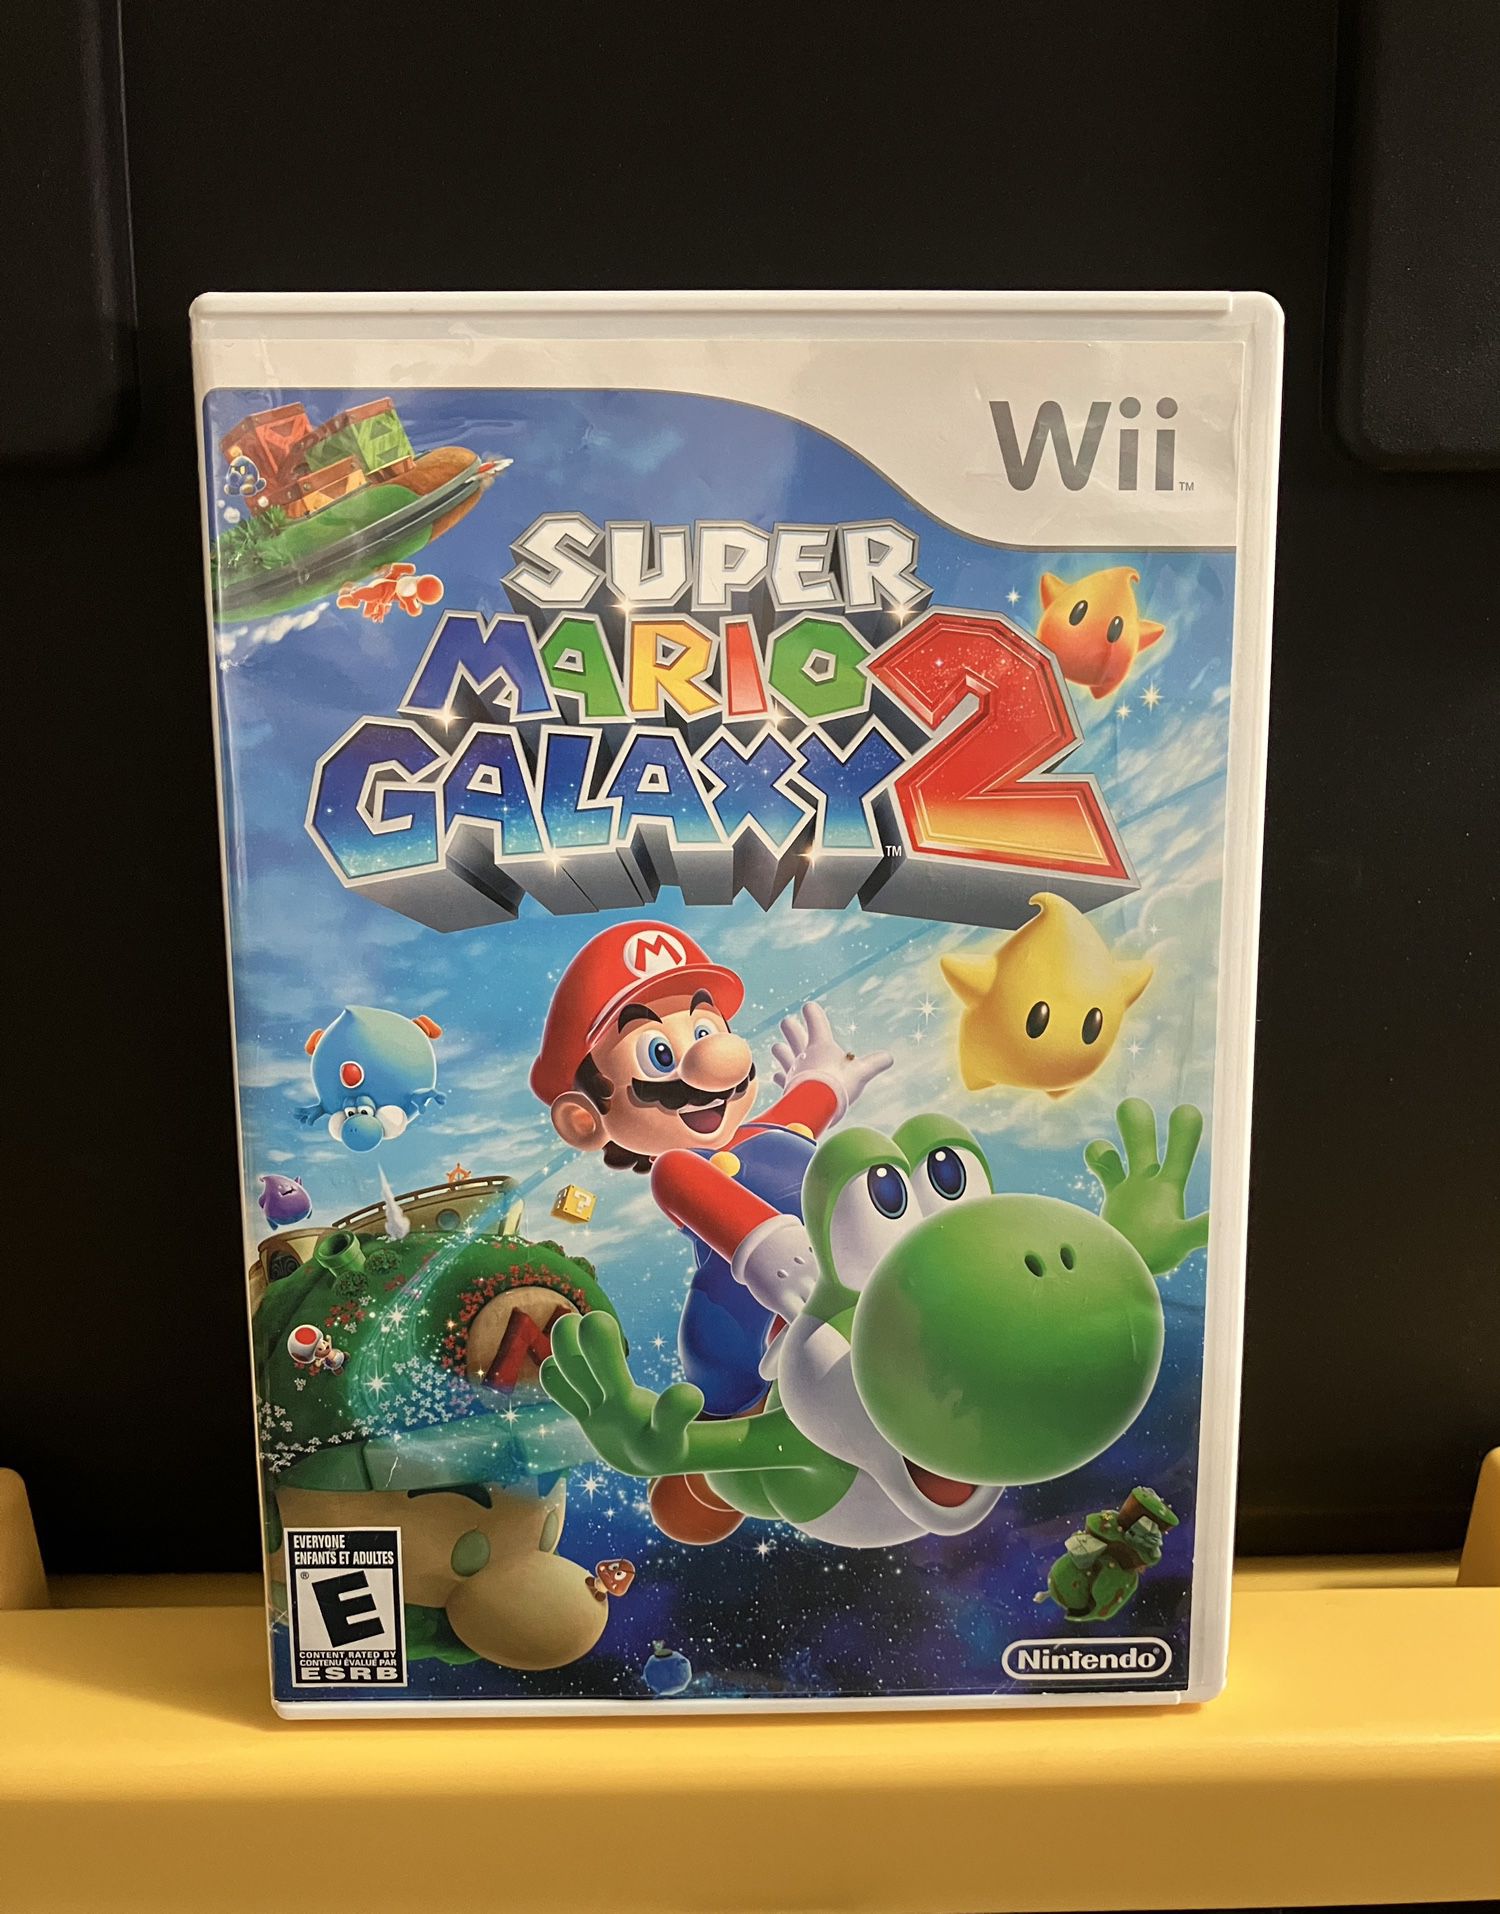 Super Mario Galaxy 2 for Nintendo Wii video game console system Bros brothers smg two